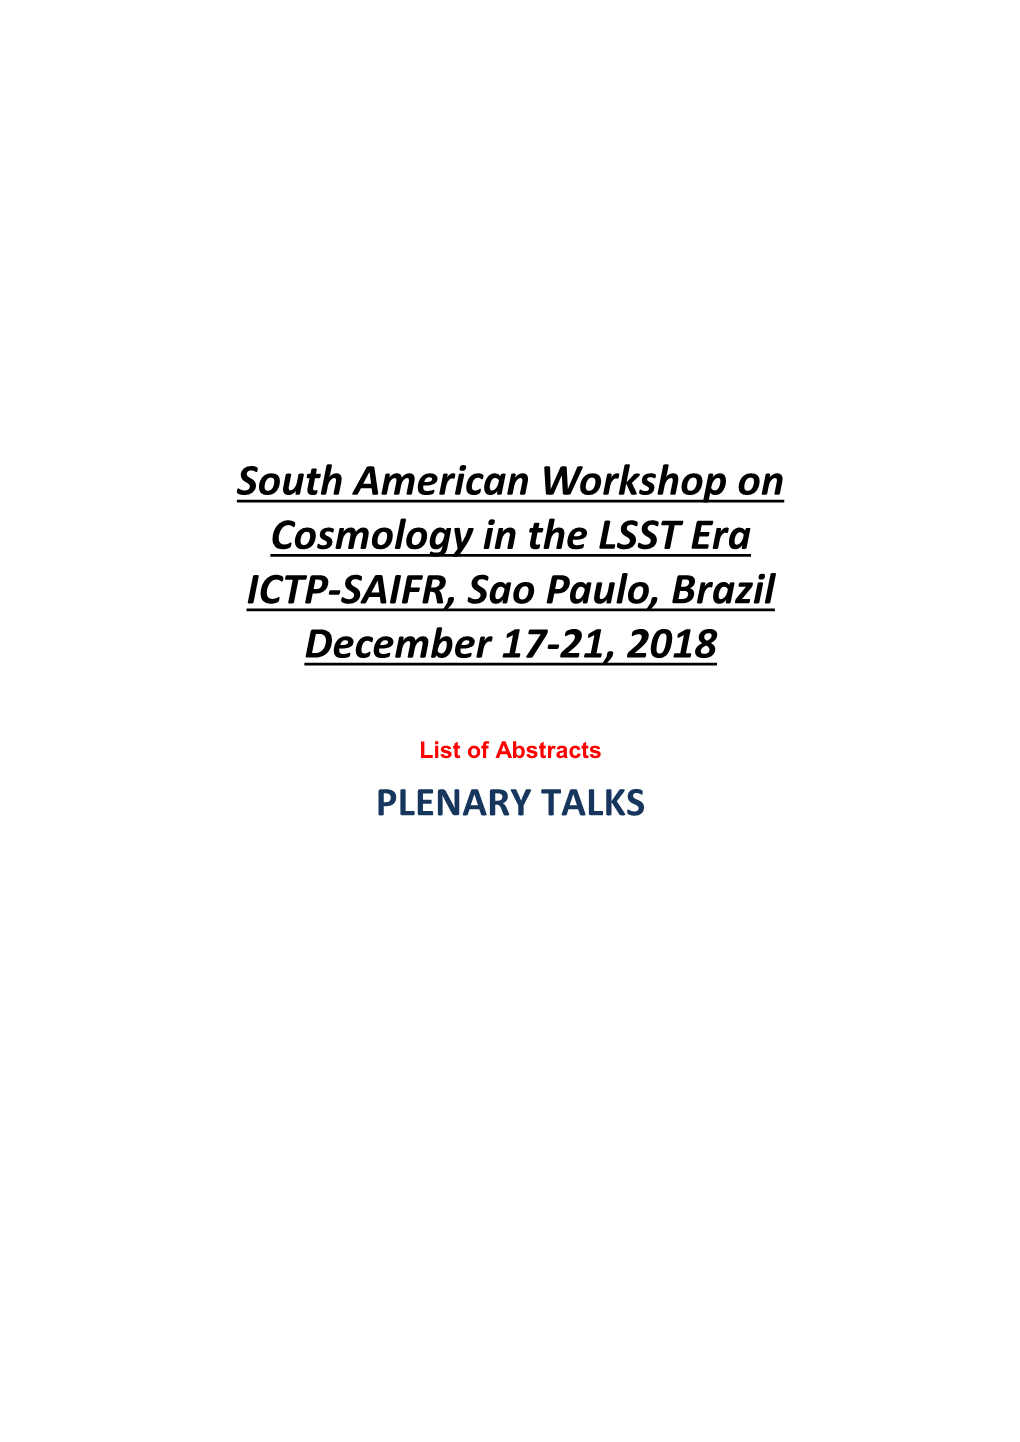 South American Workshop on Cosmology in the LSST Era ICTP-SAIFR, Sao Paulo, Brazil December 17-21, 2018